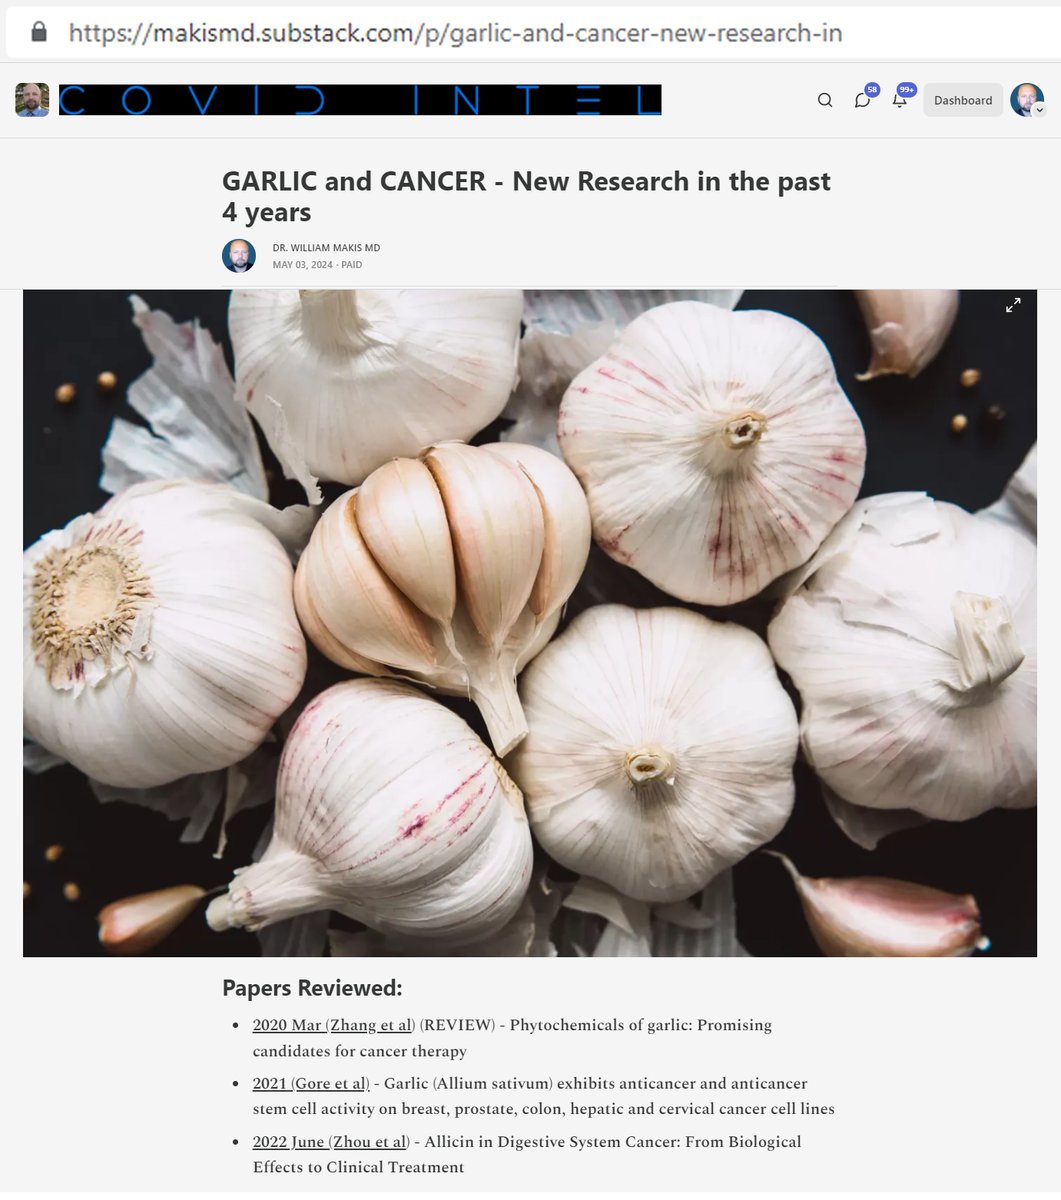 NEW ARTICLE: GARLIC and CANCER - New Research in the past 4 years I review some of the largest studies published on Garlic and its anti-Cancer effects in the past 4 years. Medicinal properties of garlic have been known for over 5000 years. In 1958, Weisberger & Pensky reported…